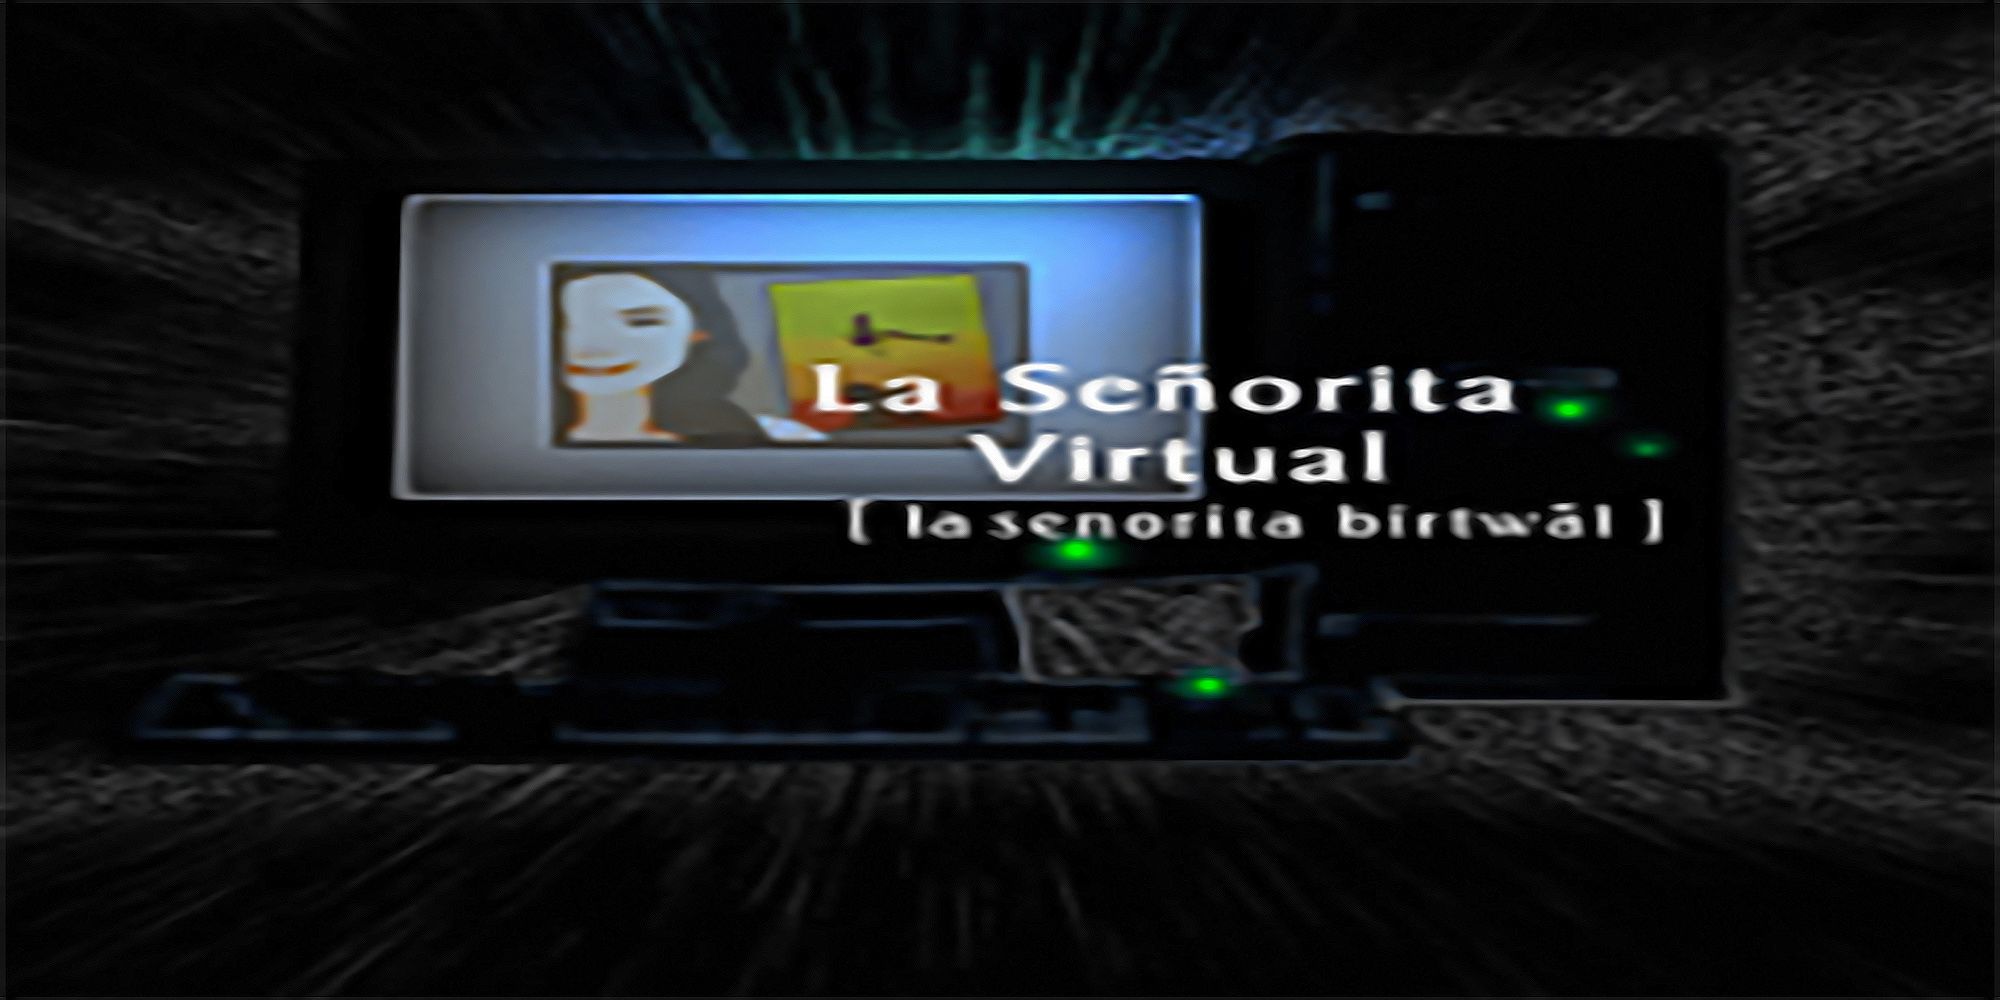 A cyberwoman greets her user on a computer monitor in this background art for La Senorita Virtual, a track from DDR 3rd Mix's console release.